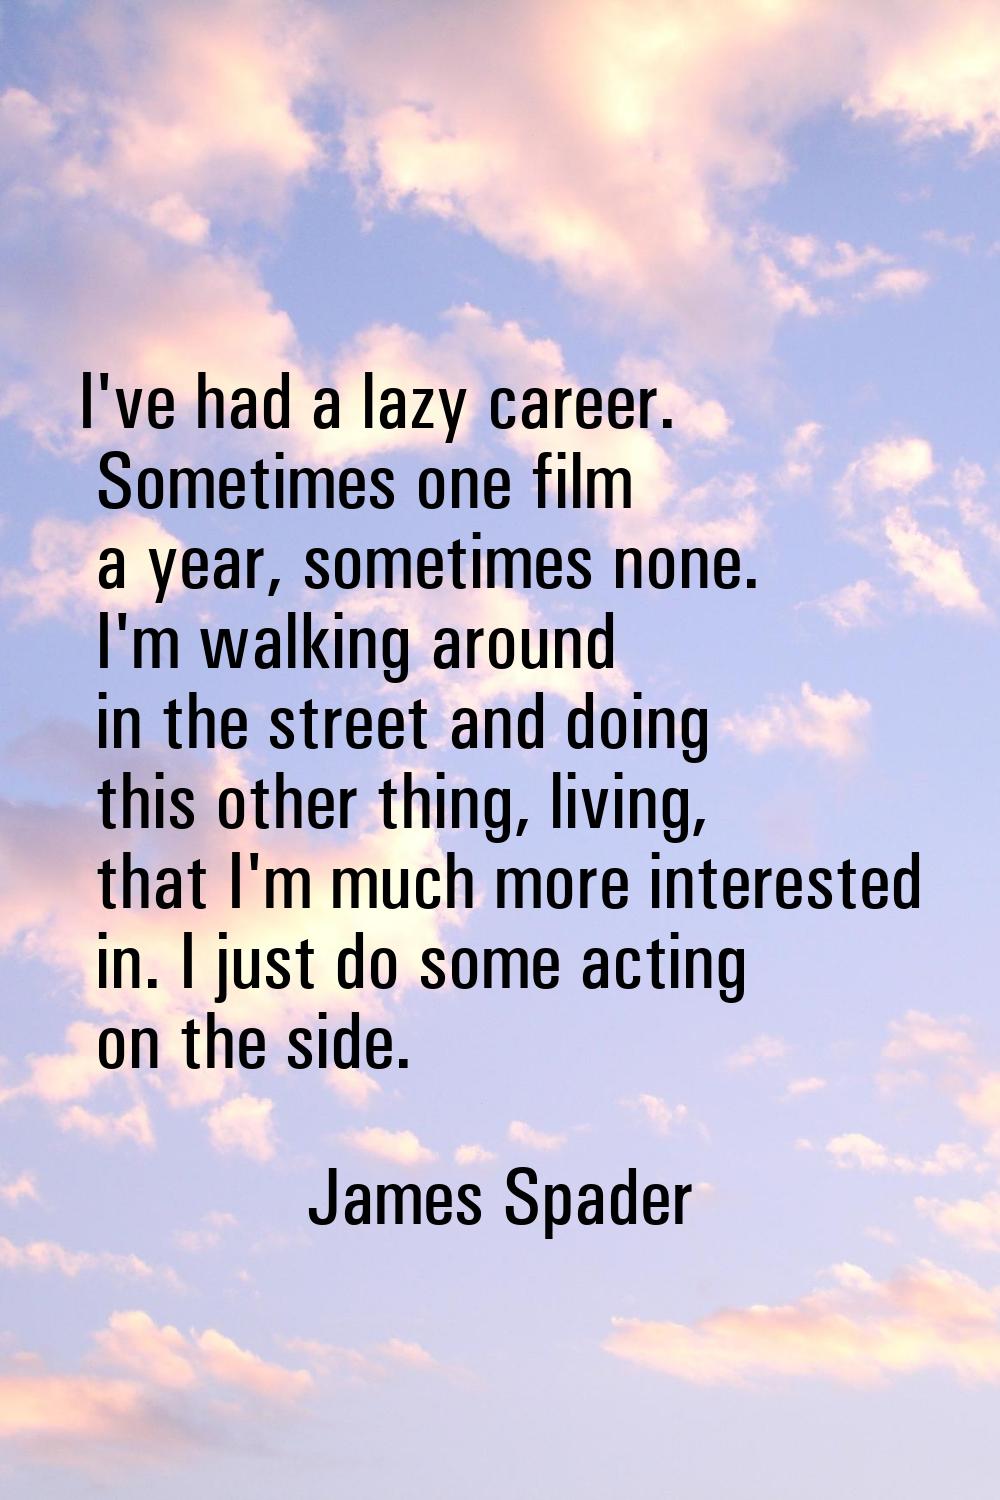 I've had a lazy career. Sometimes one film a year, sometimes none. I'm walking around in the street